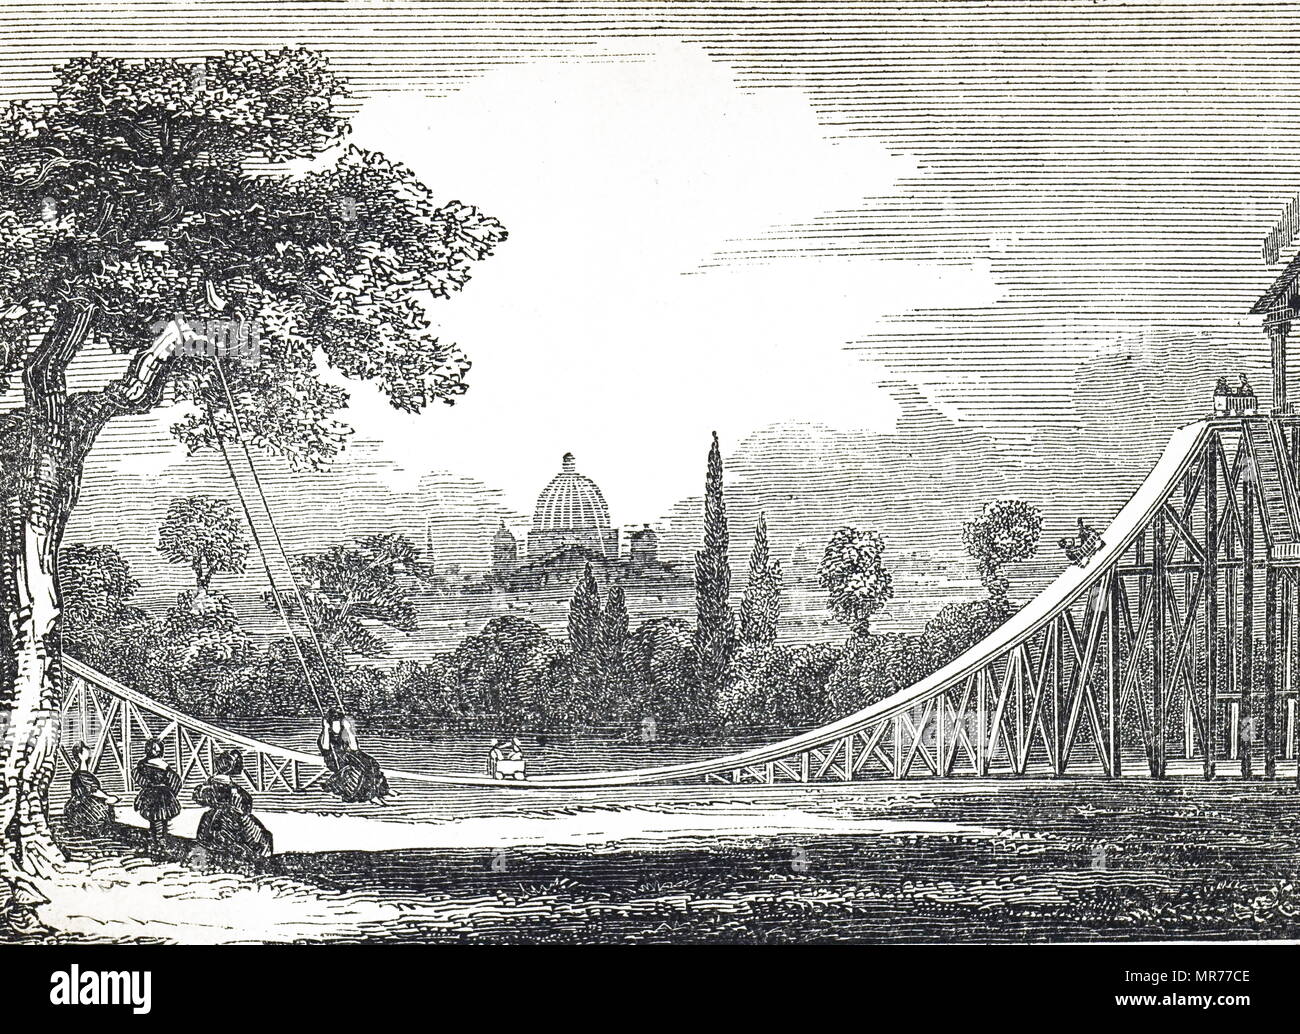 Engraving depicting a recreation ground with a slide in a London setting, as a group of young girls play on a swing. Dated 19th century Stock Photo